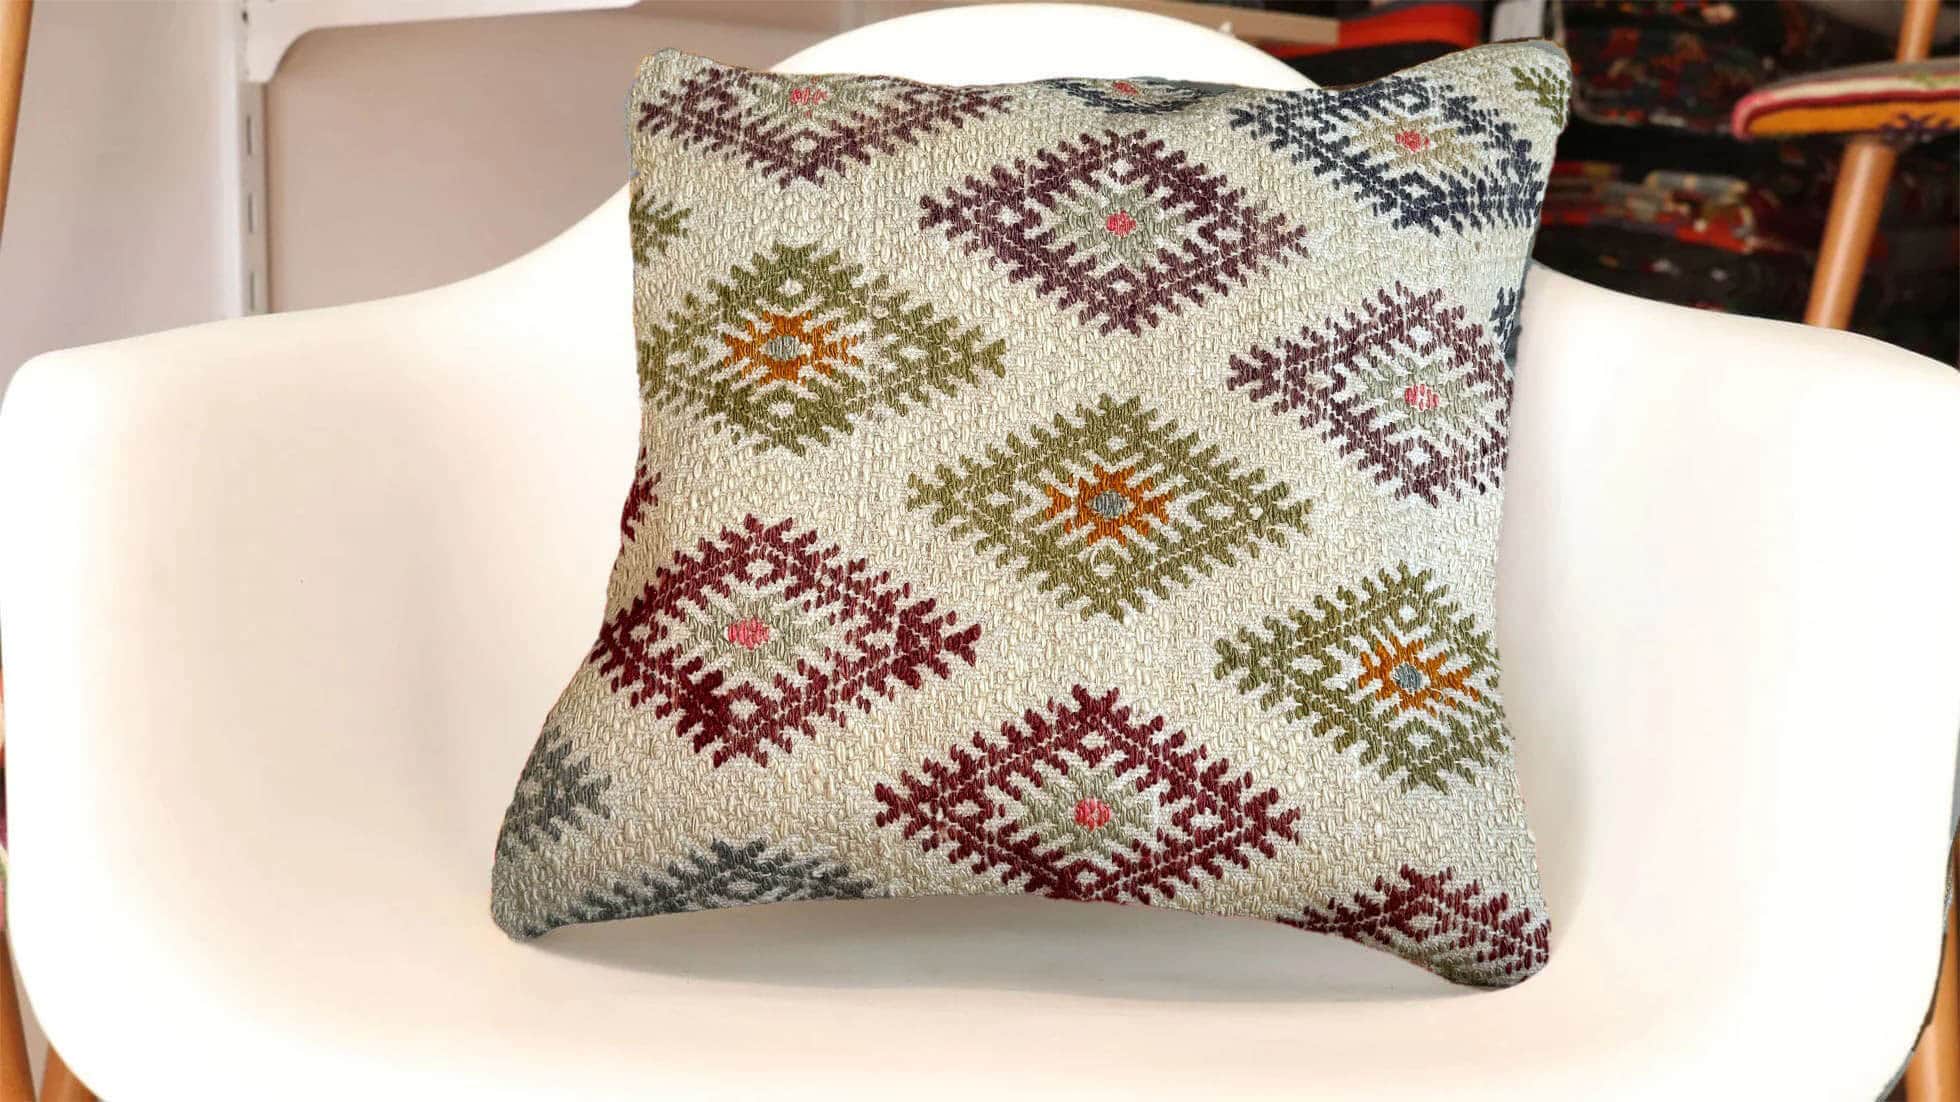 Vintage Handwoven Minimalist Kilim Pillow in Cream, Green and Red by Kilim Couture NYC